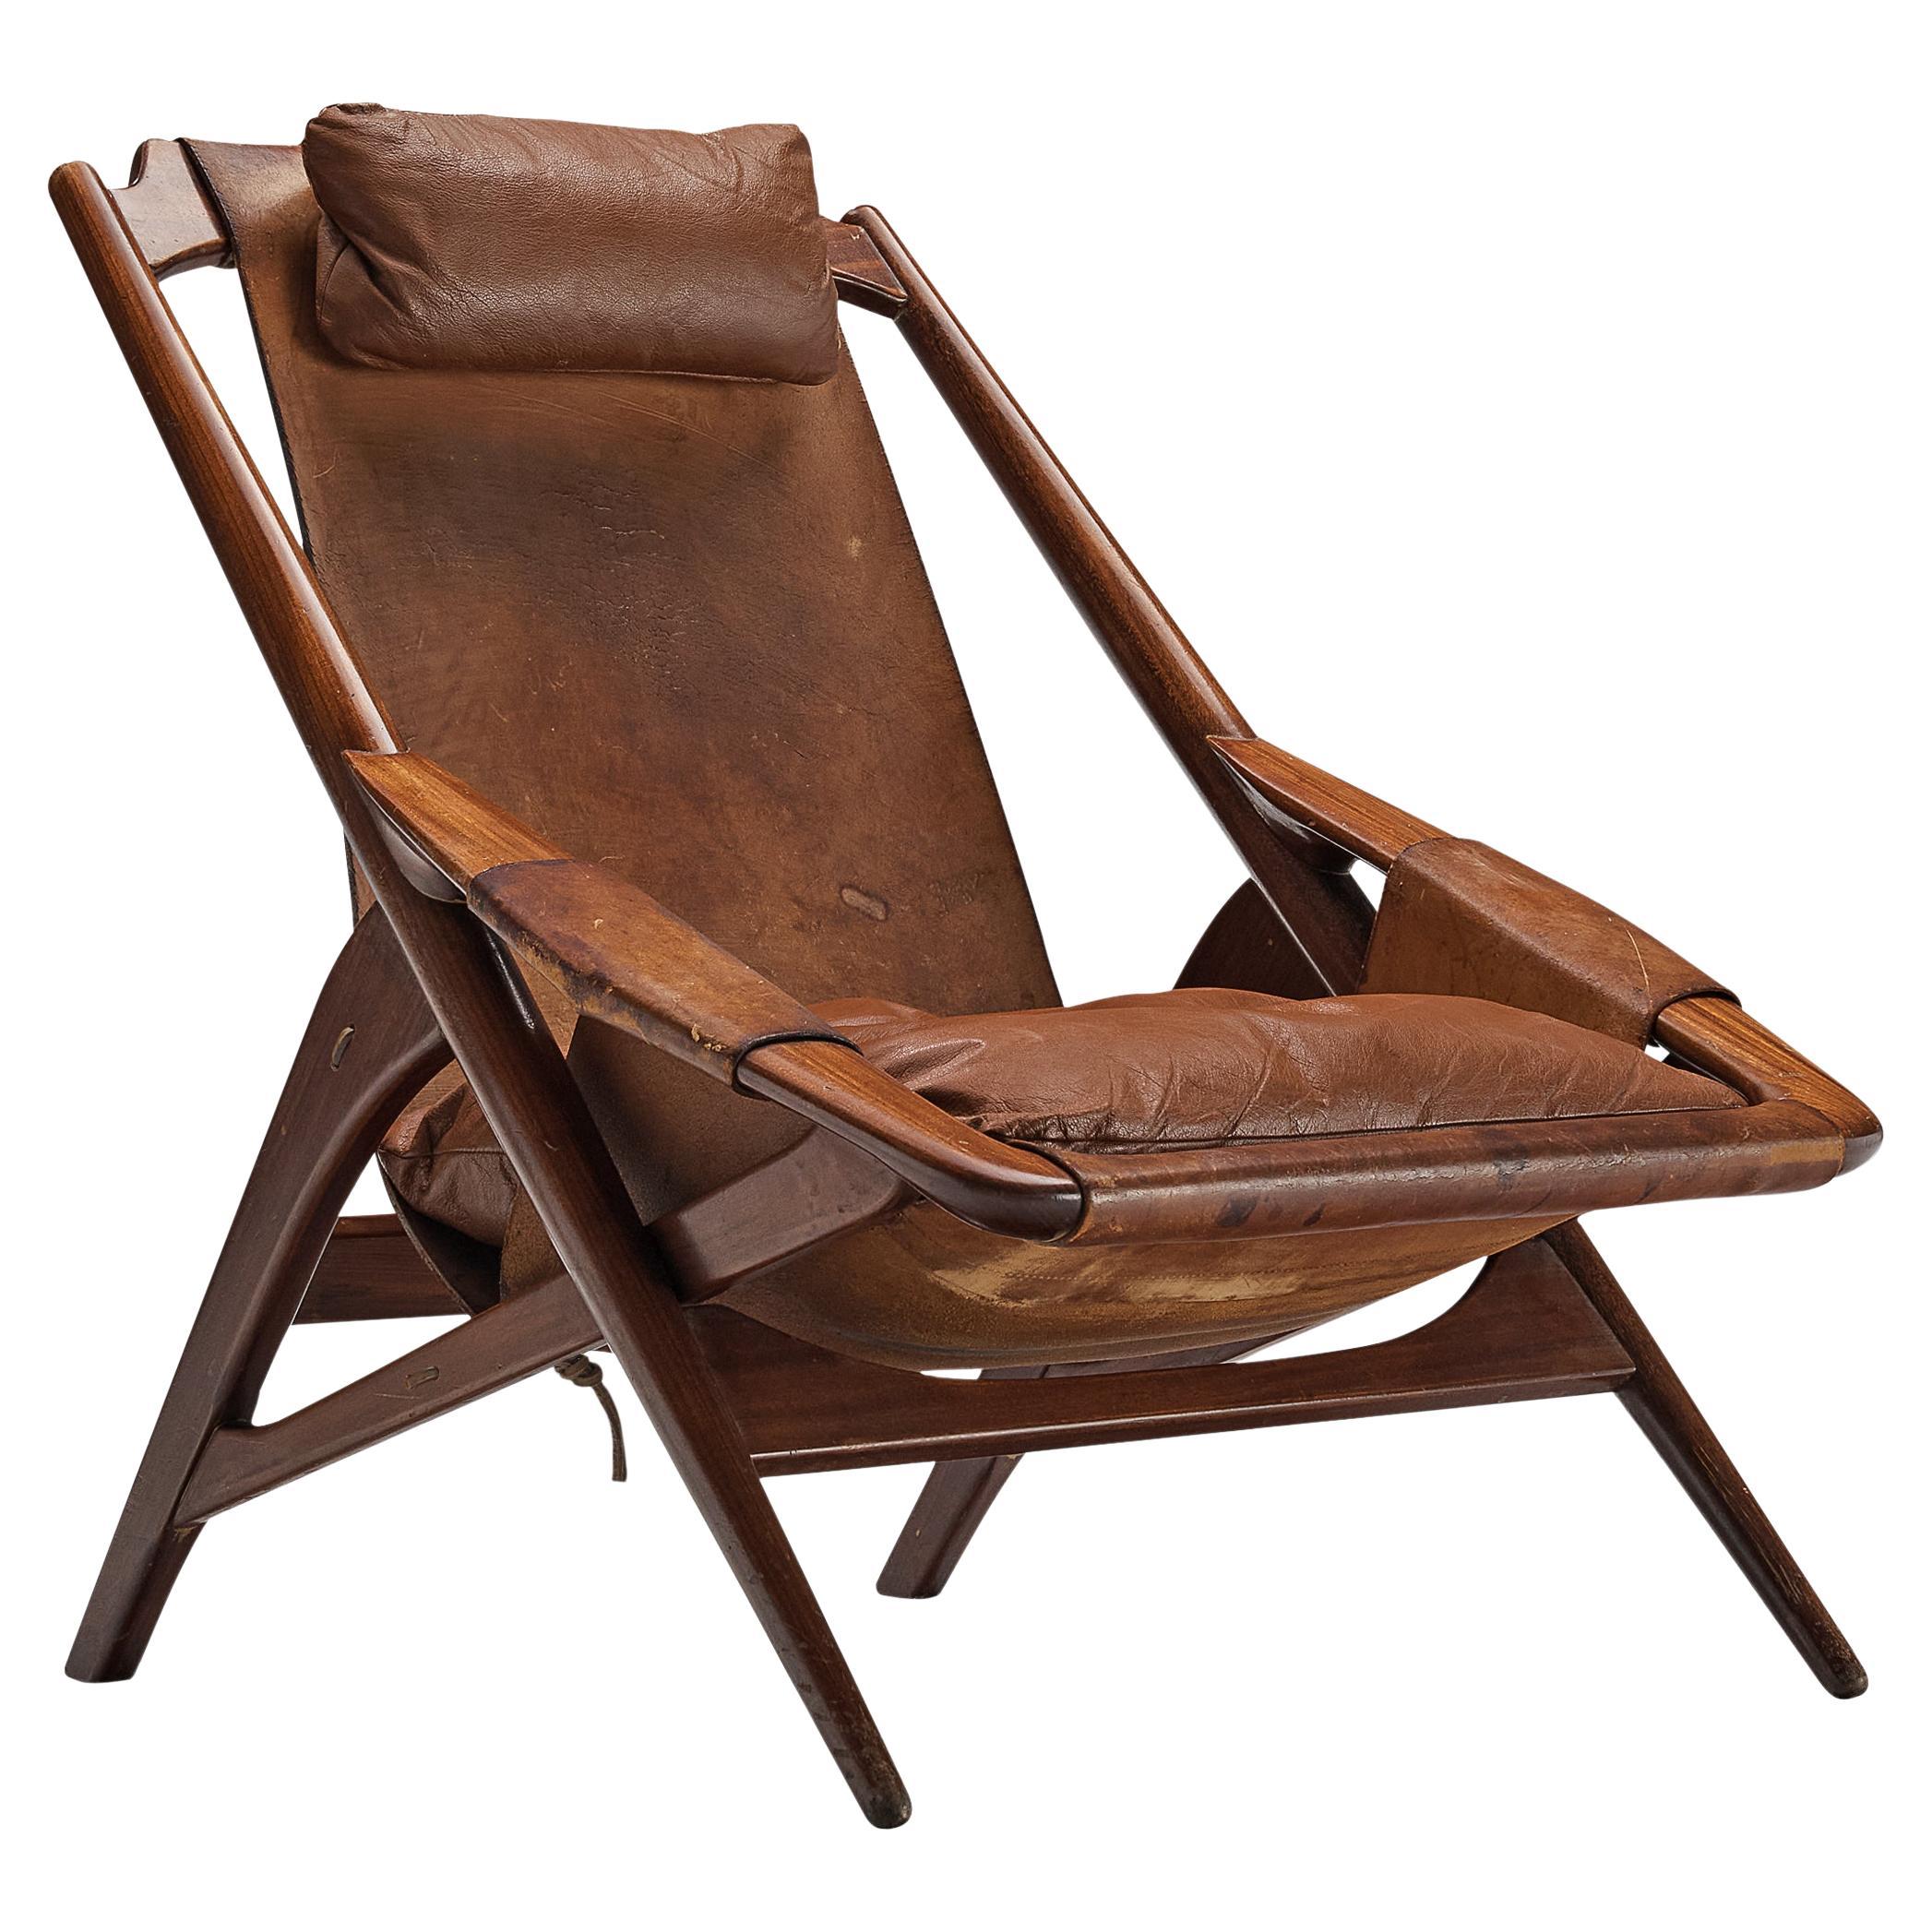 W. Andersag Lounge Chair in Patinated Leather and Teak 